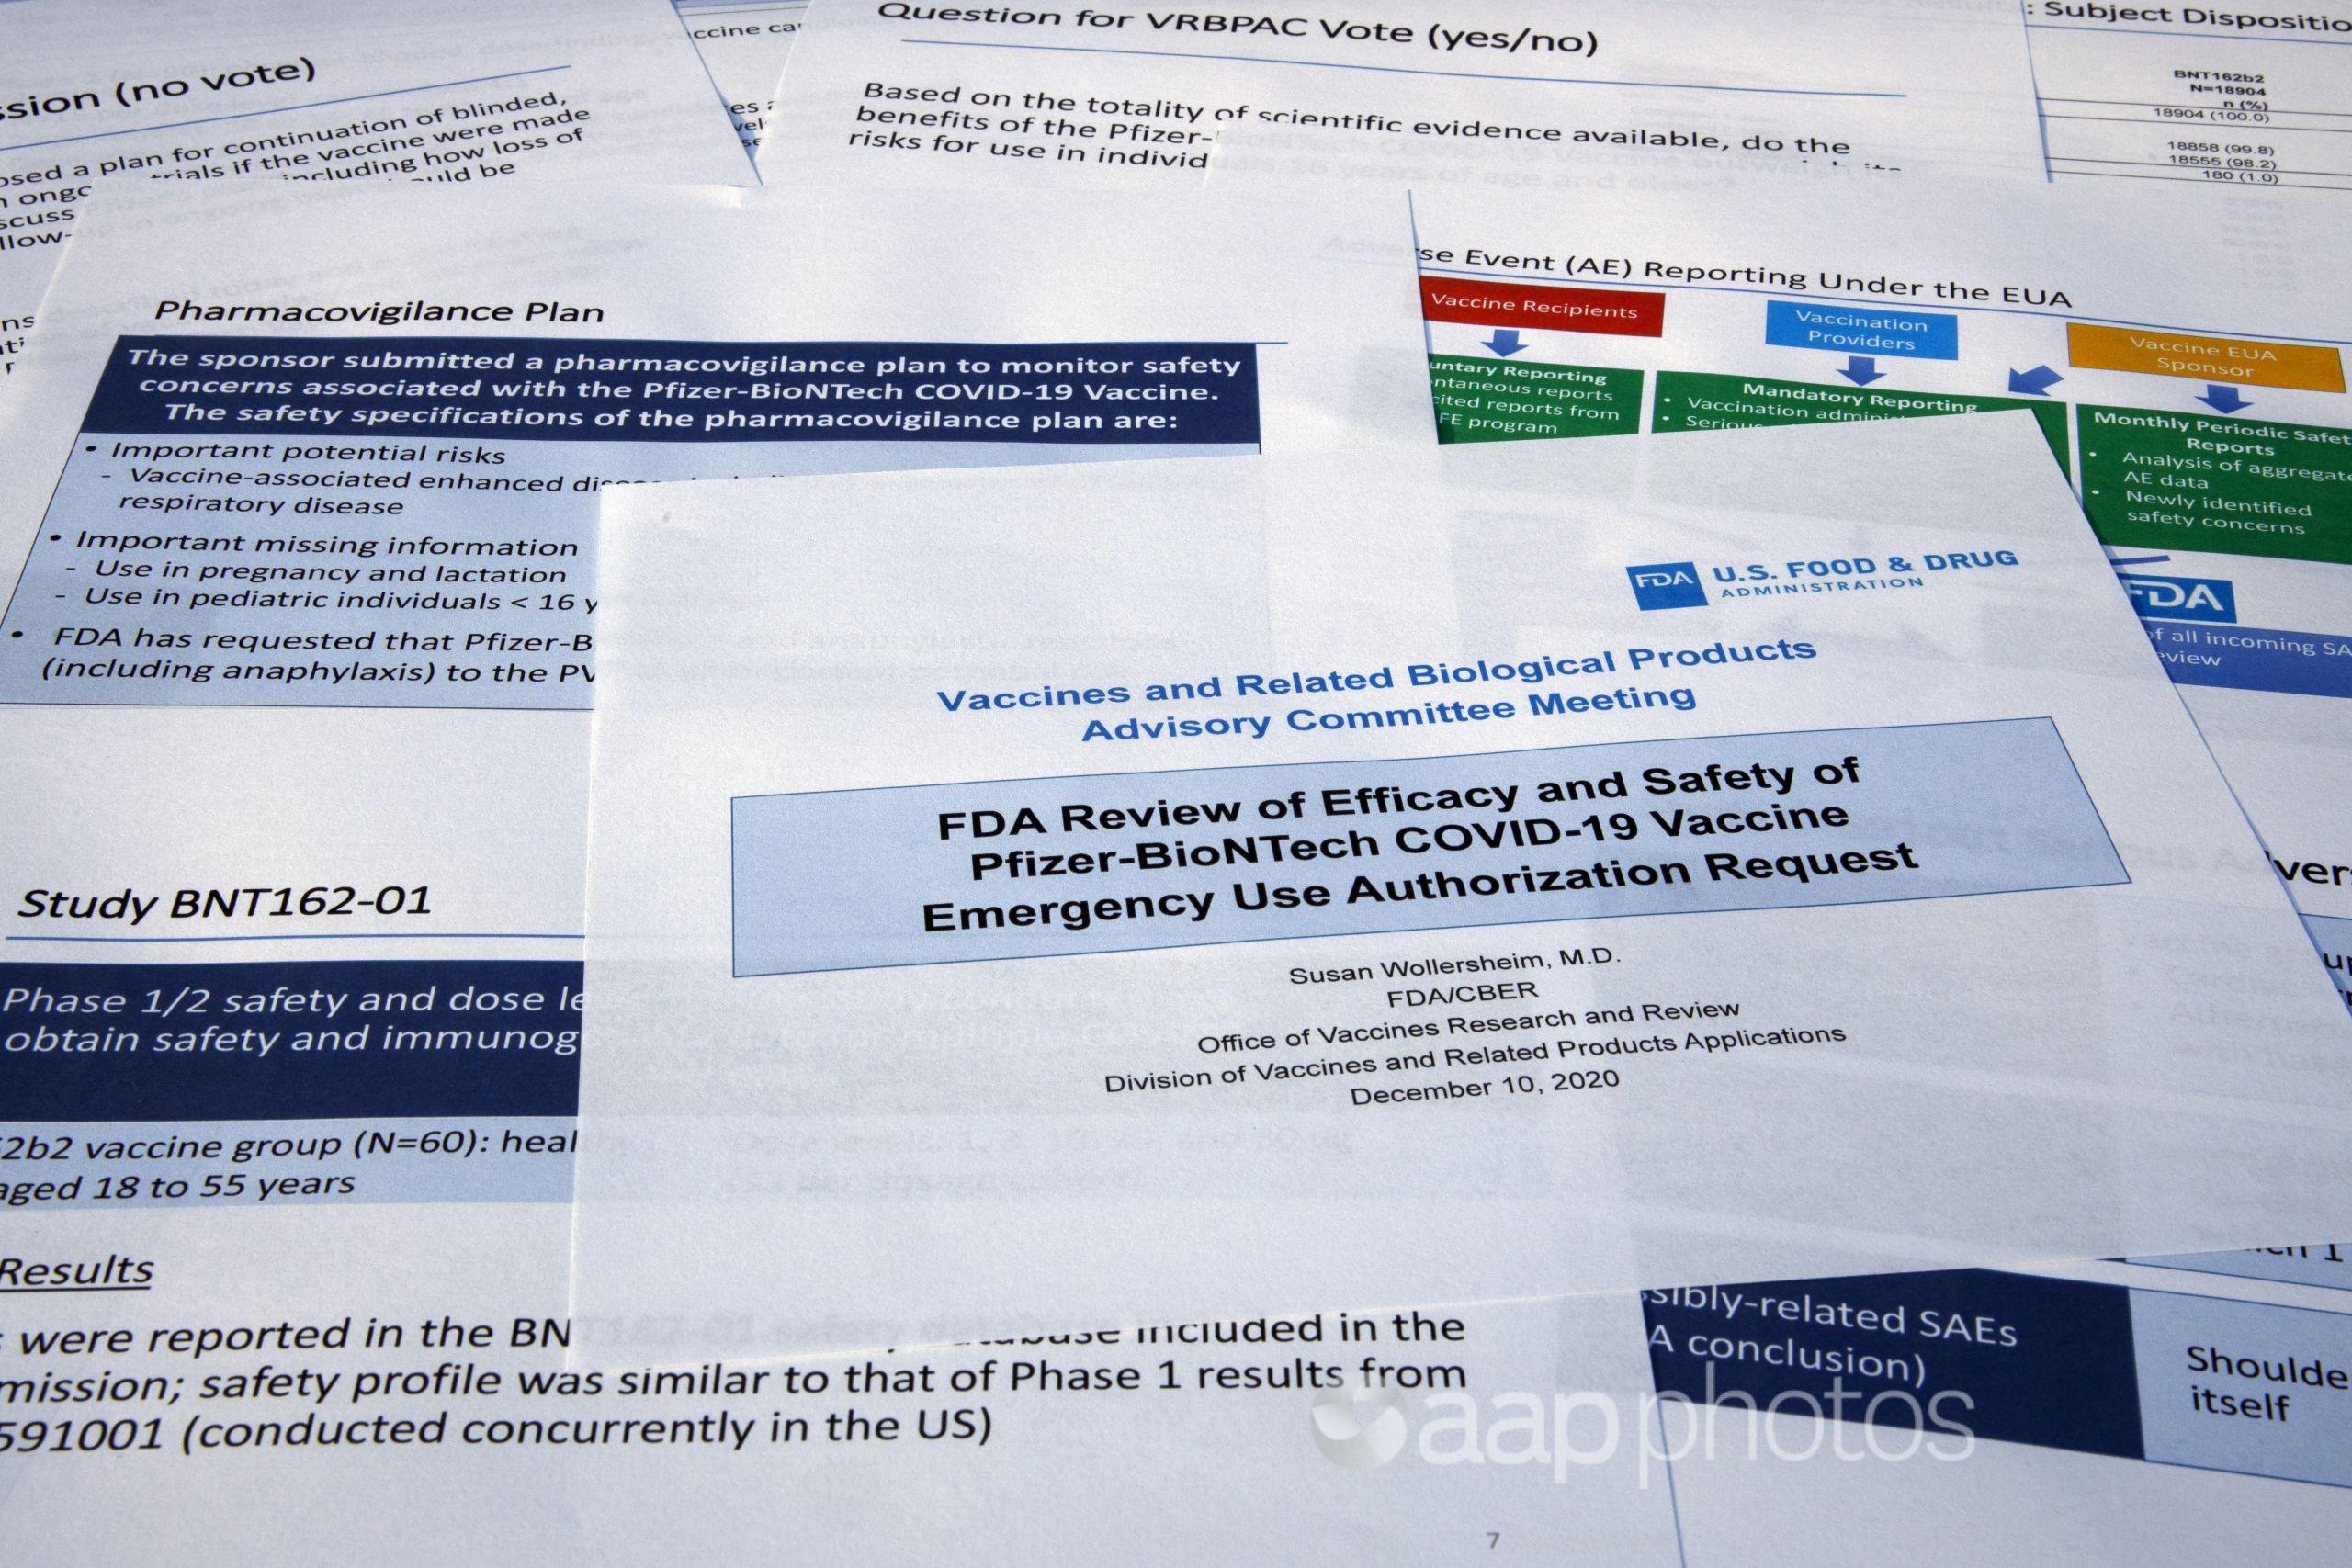 Documents created by the Food and Drug Administration